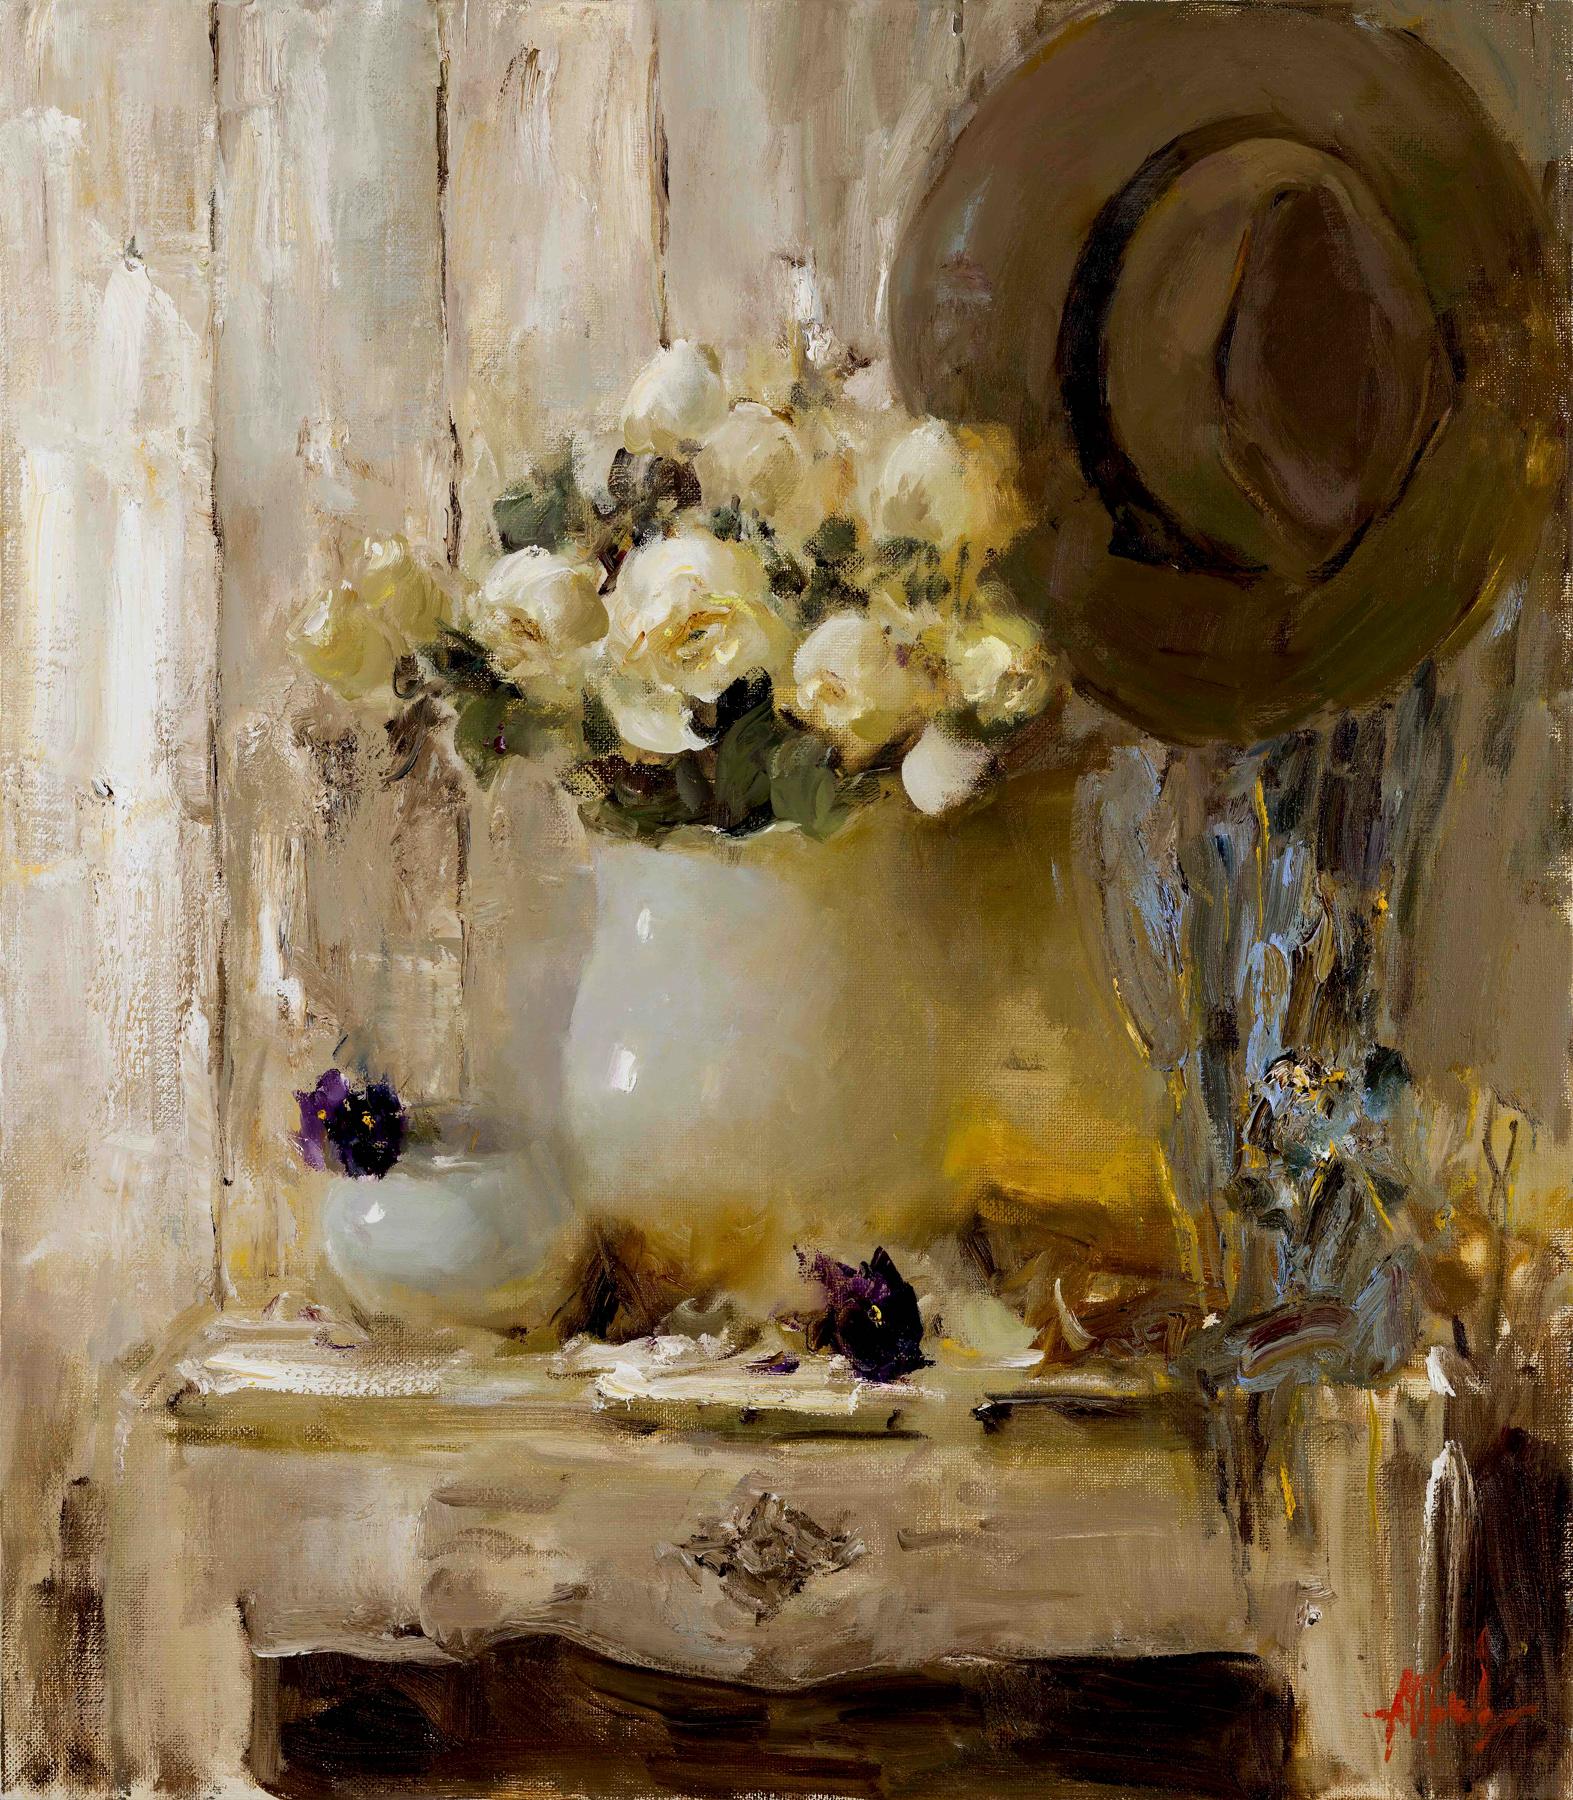 White Bouquet and hat, 2020. Original modern art painting